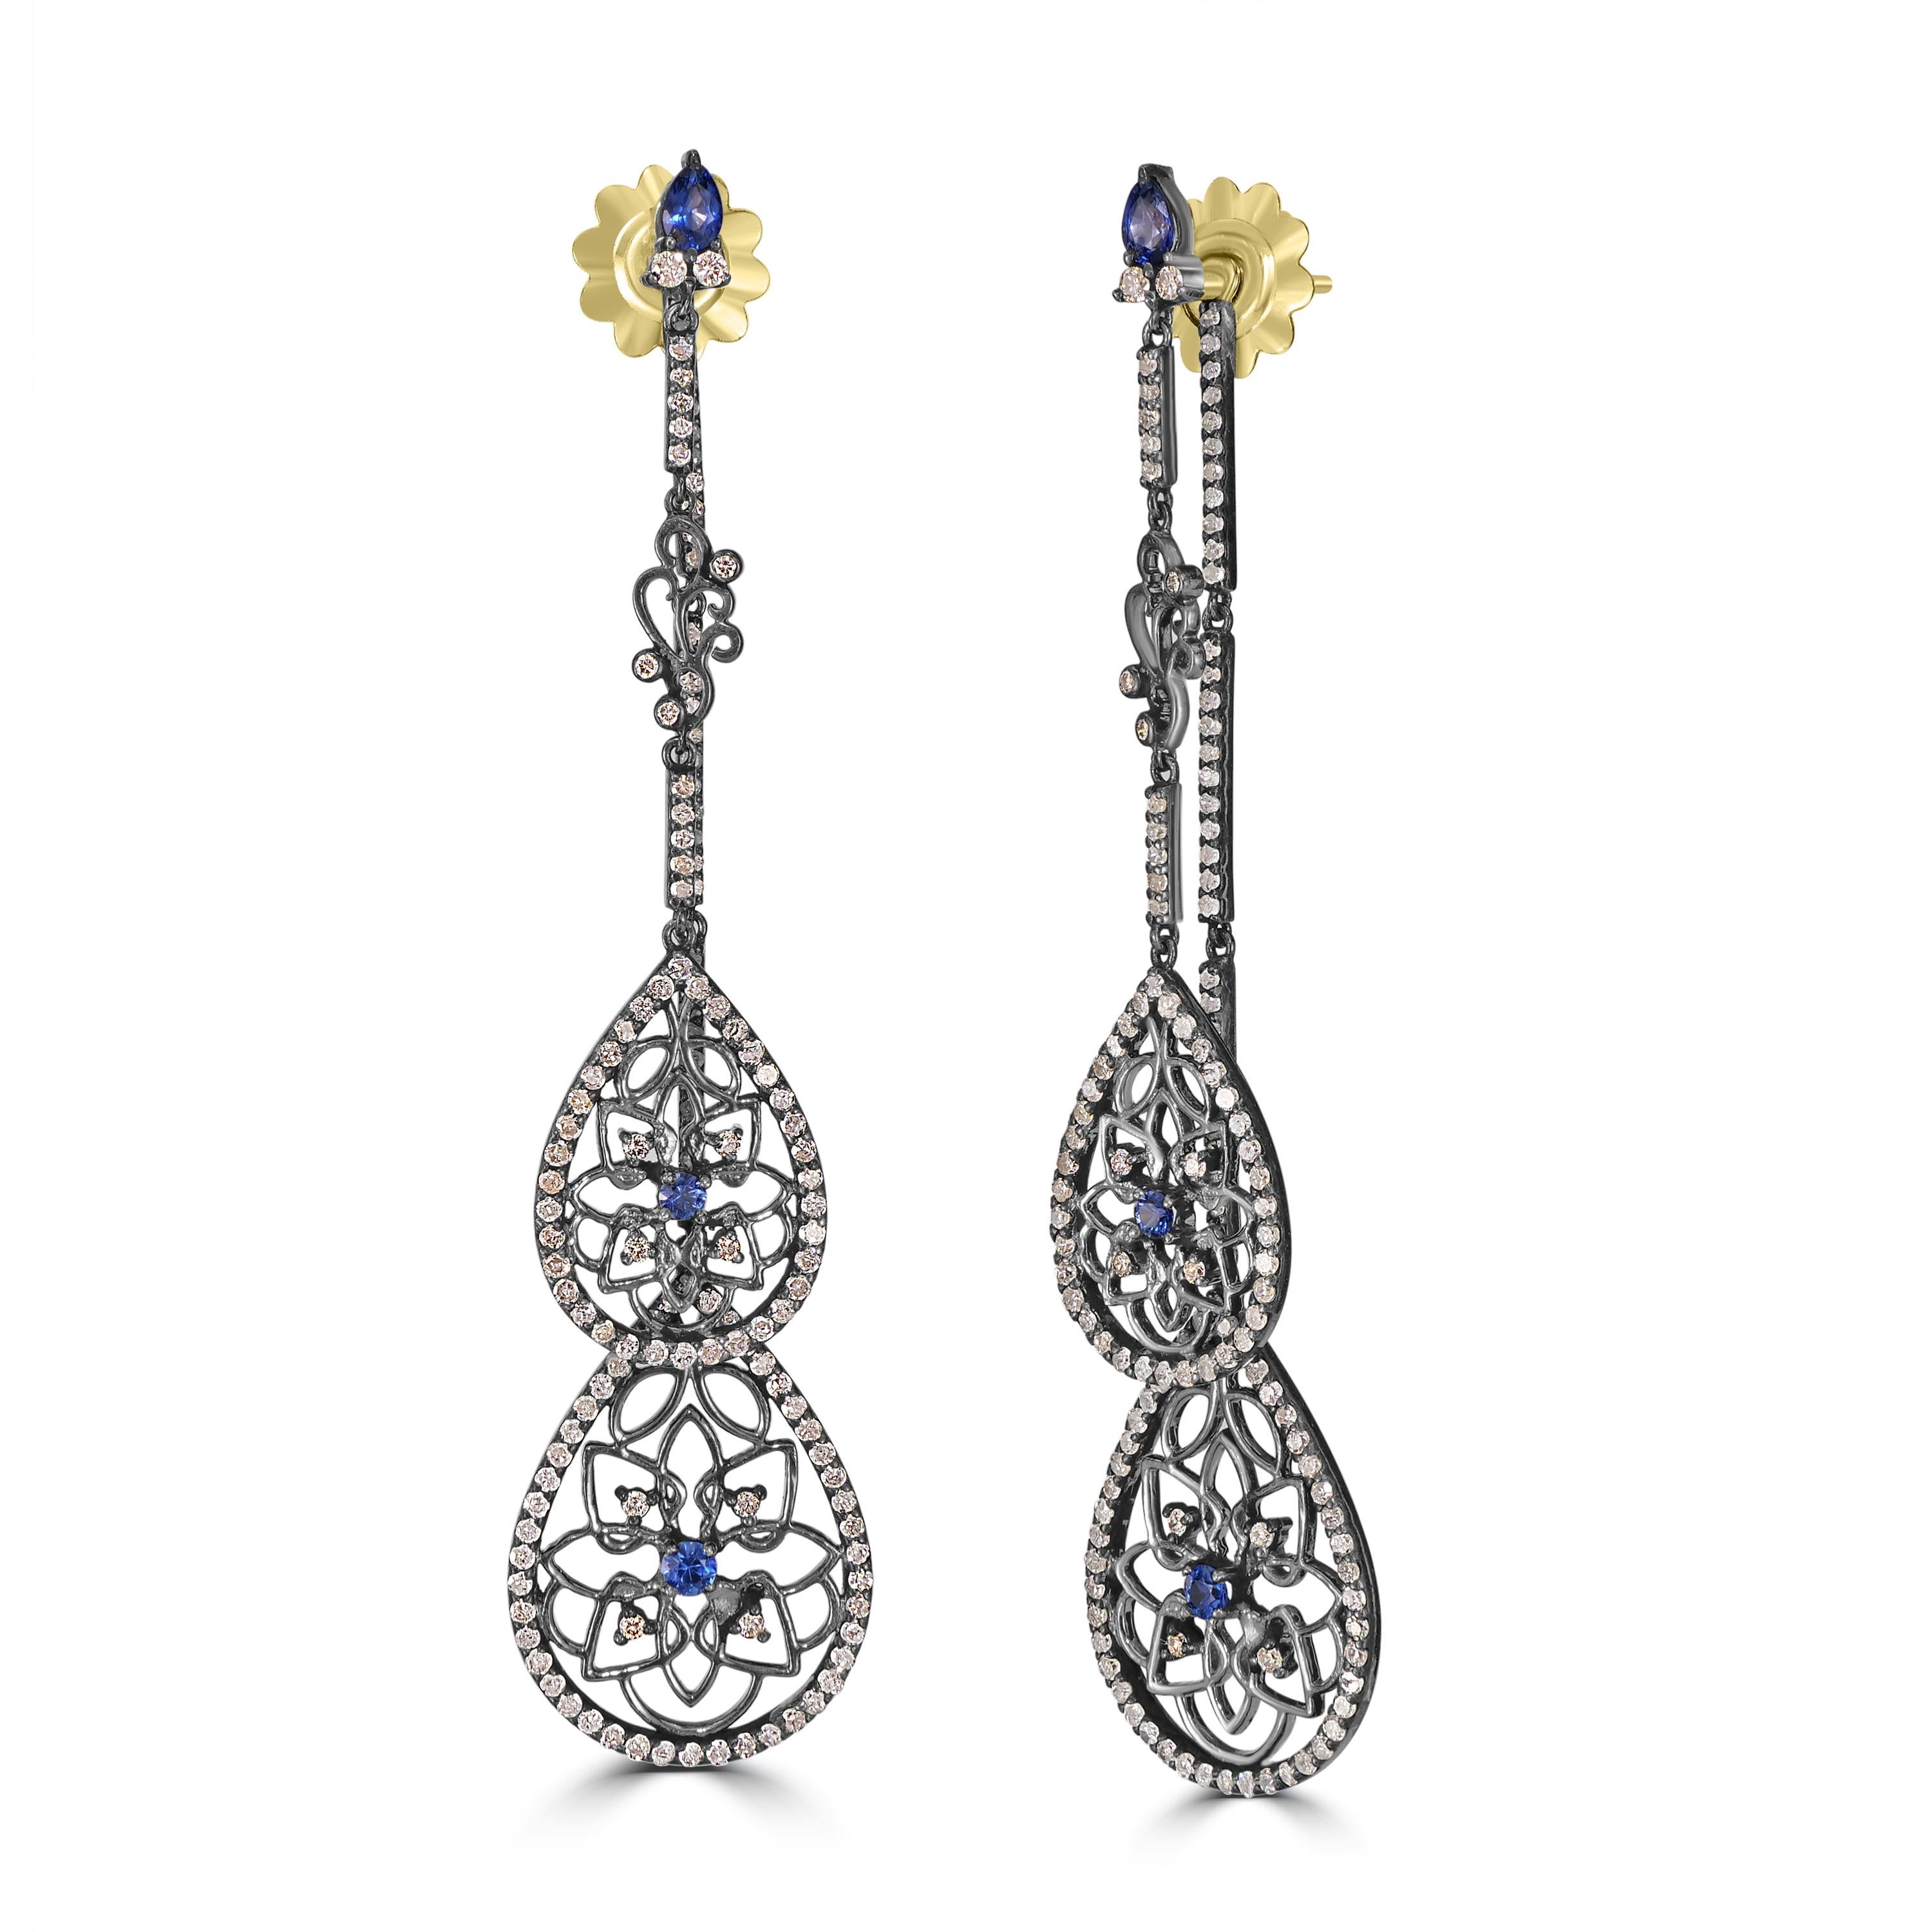 Experience the allure of Victorian elegance with our 10.28 Cttw. Blue Sapphire and Diamond Front Back Double Drop Earrings—an exquisite testament to timeless sophistication and meticulous craftsmanship.

These captivating earrings feature two